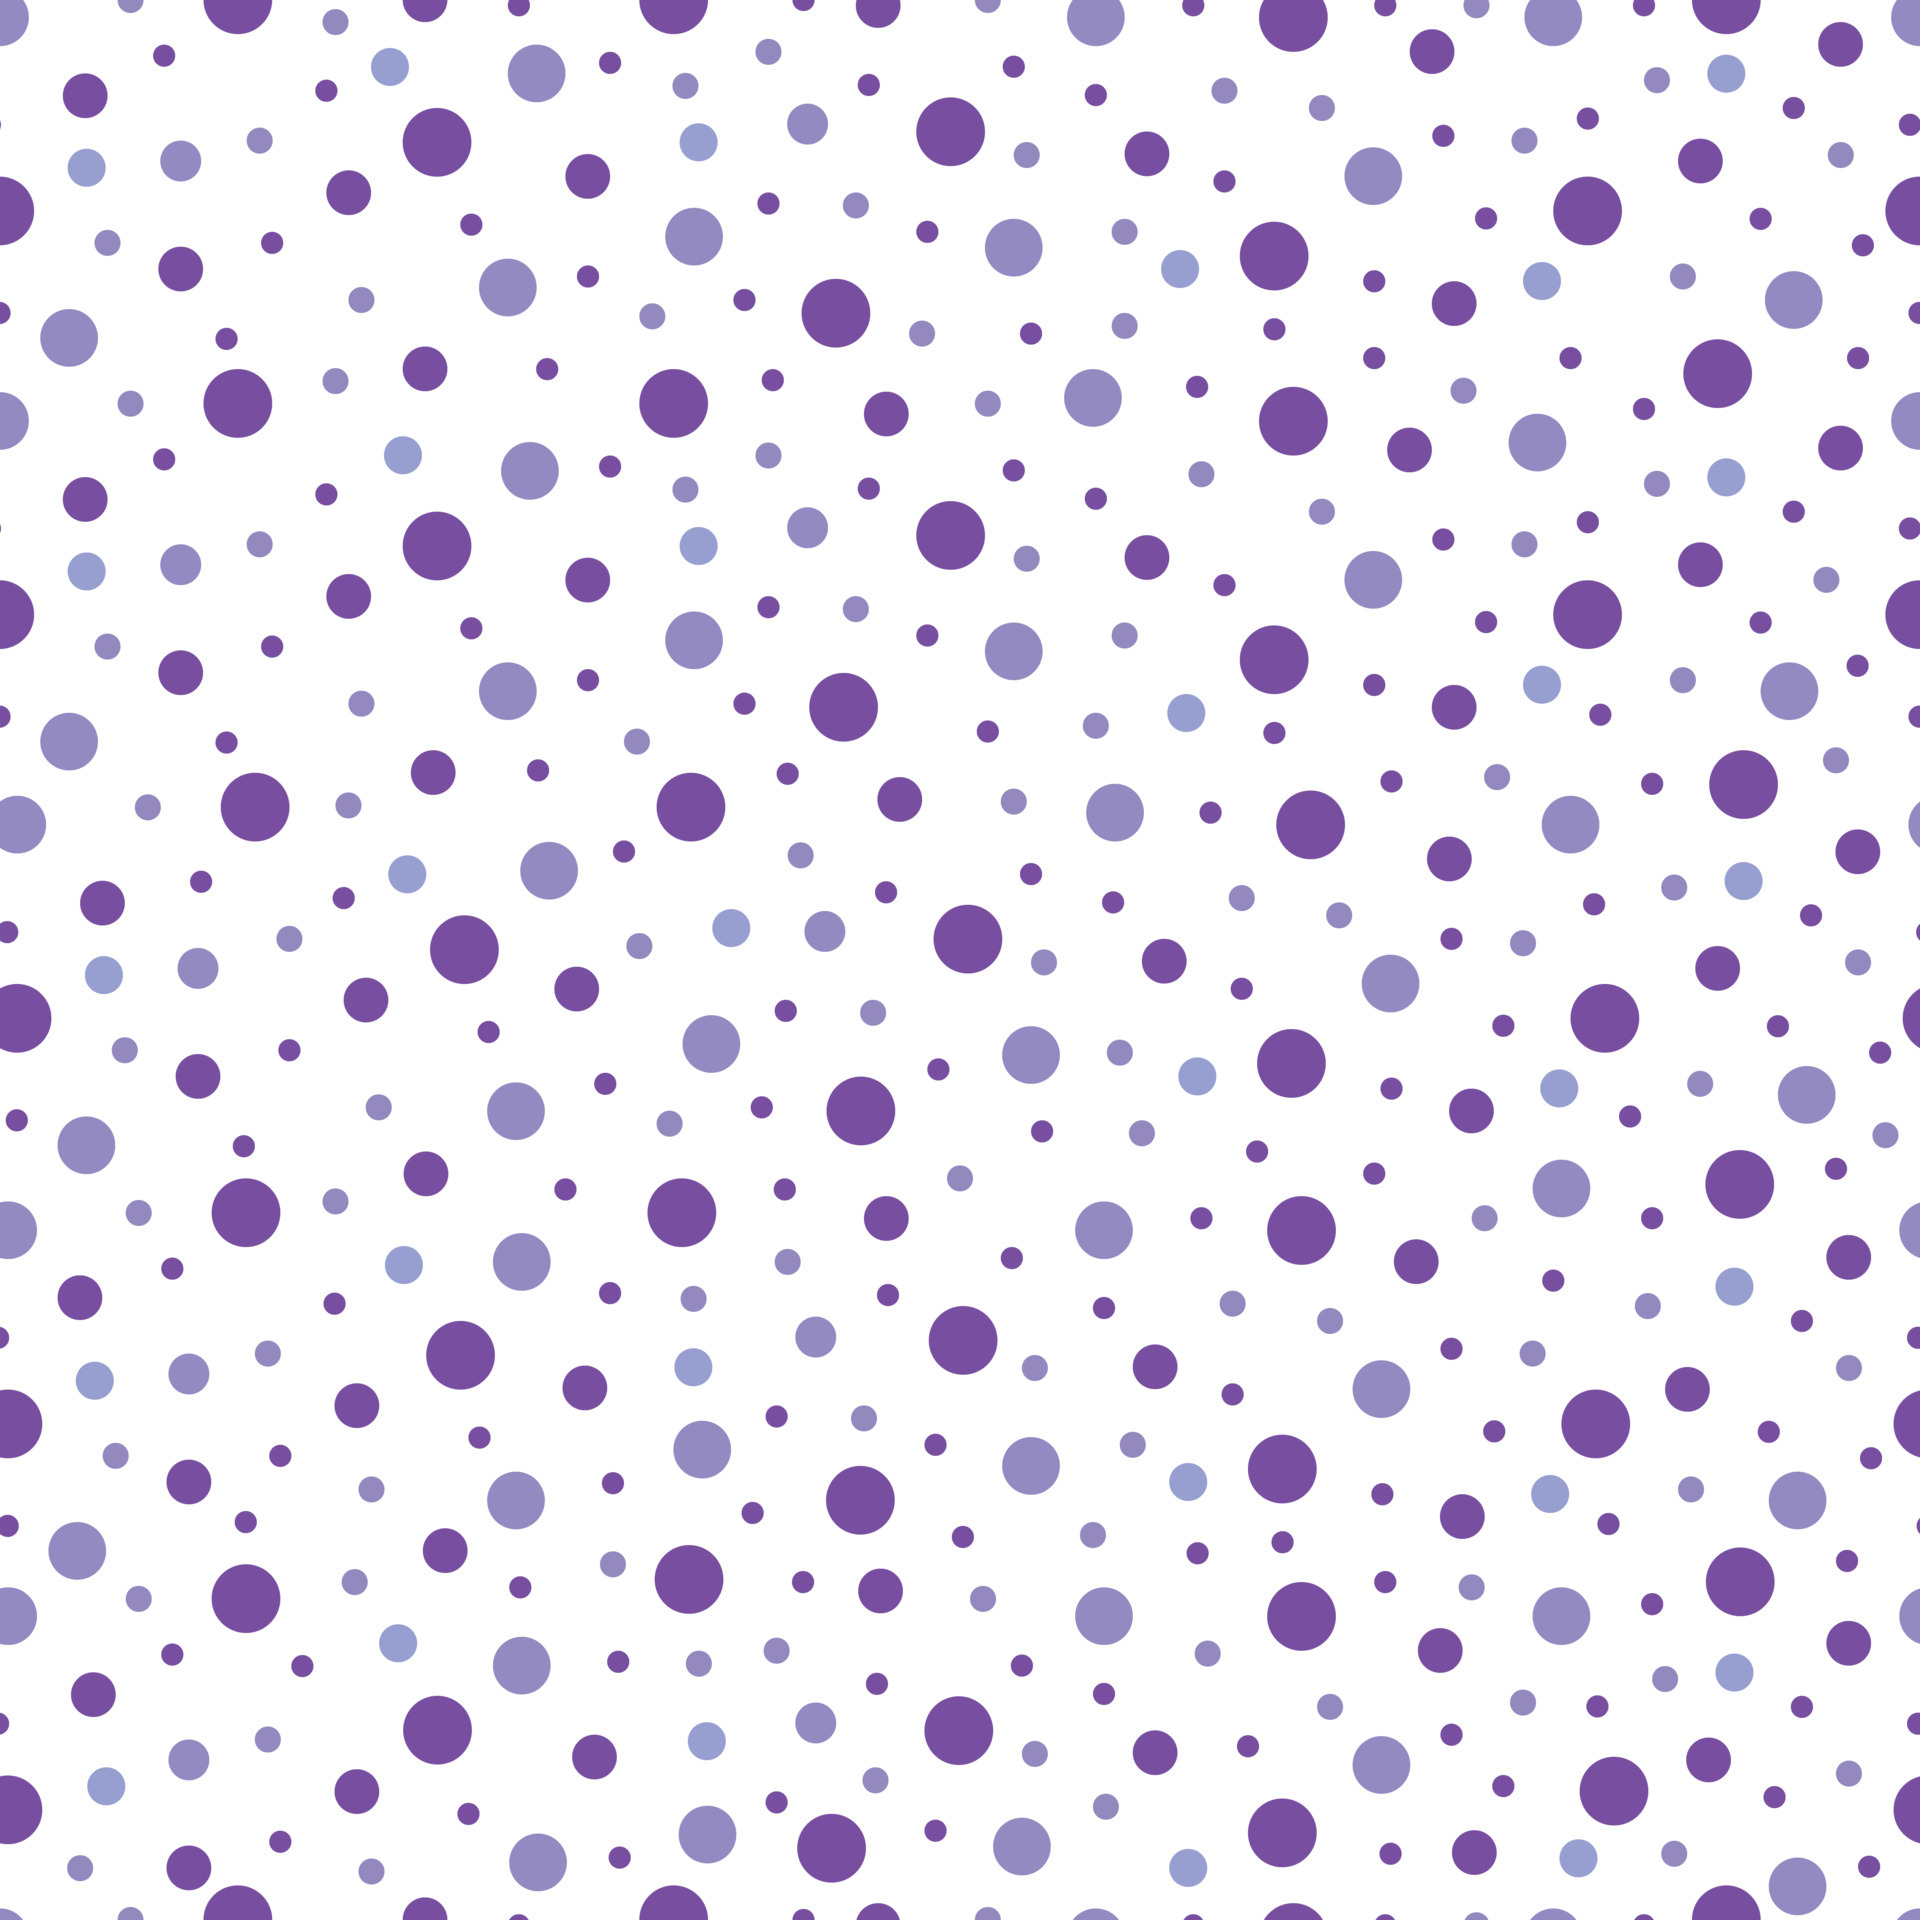 Abstract Polka Dots Background White Seamless Pattern With Purple Circle Design For